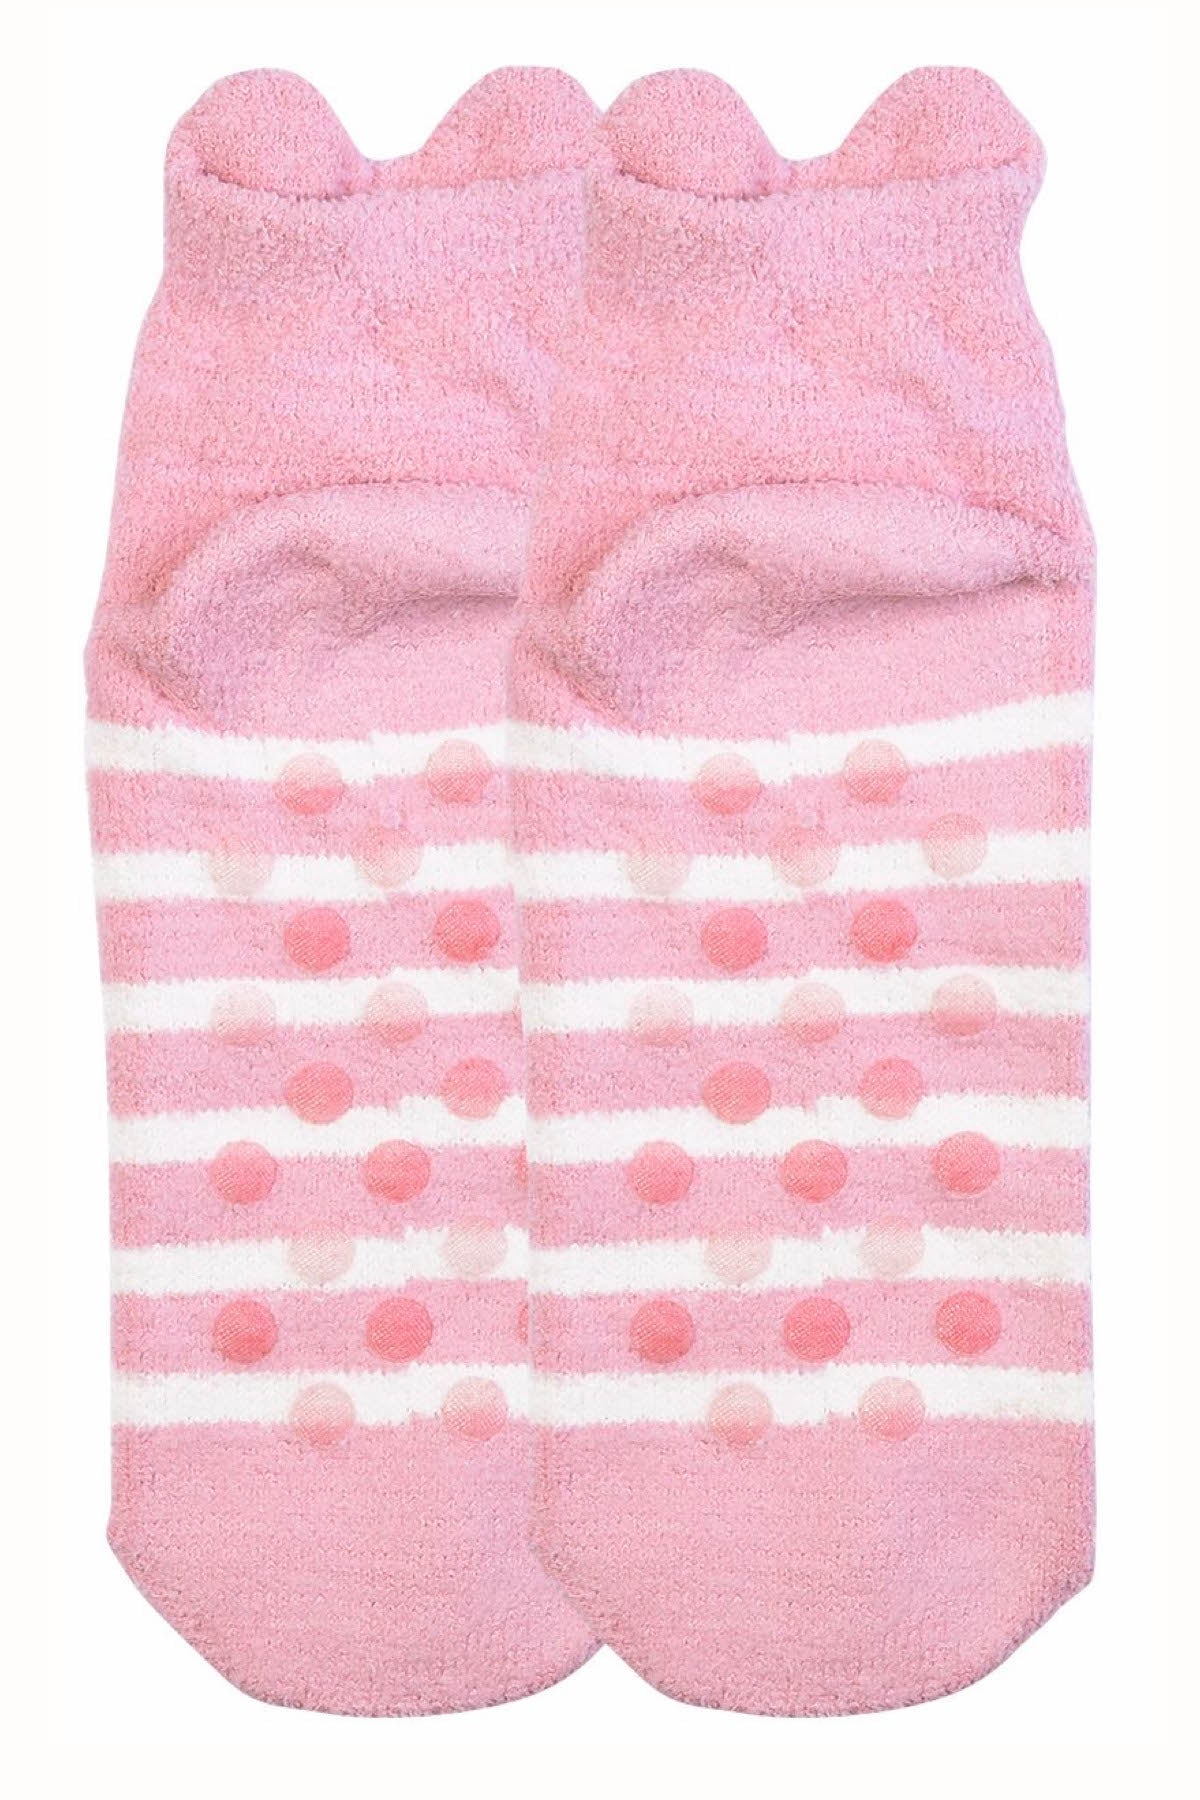 Sofra Pink Mouse Cozy Picot Ankle Socks with Grippers